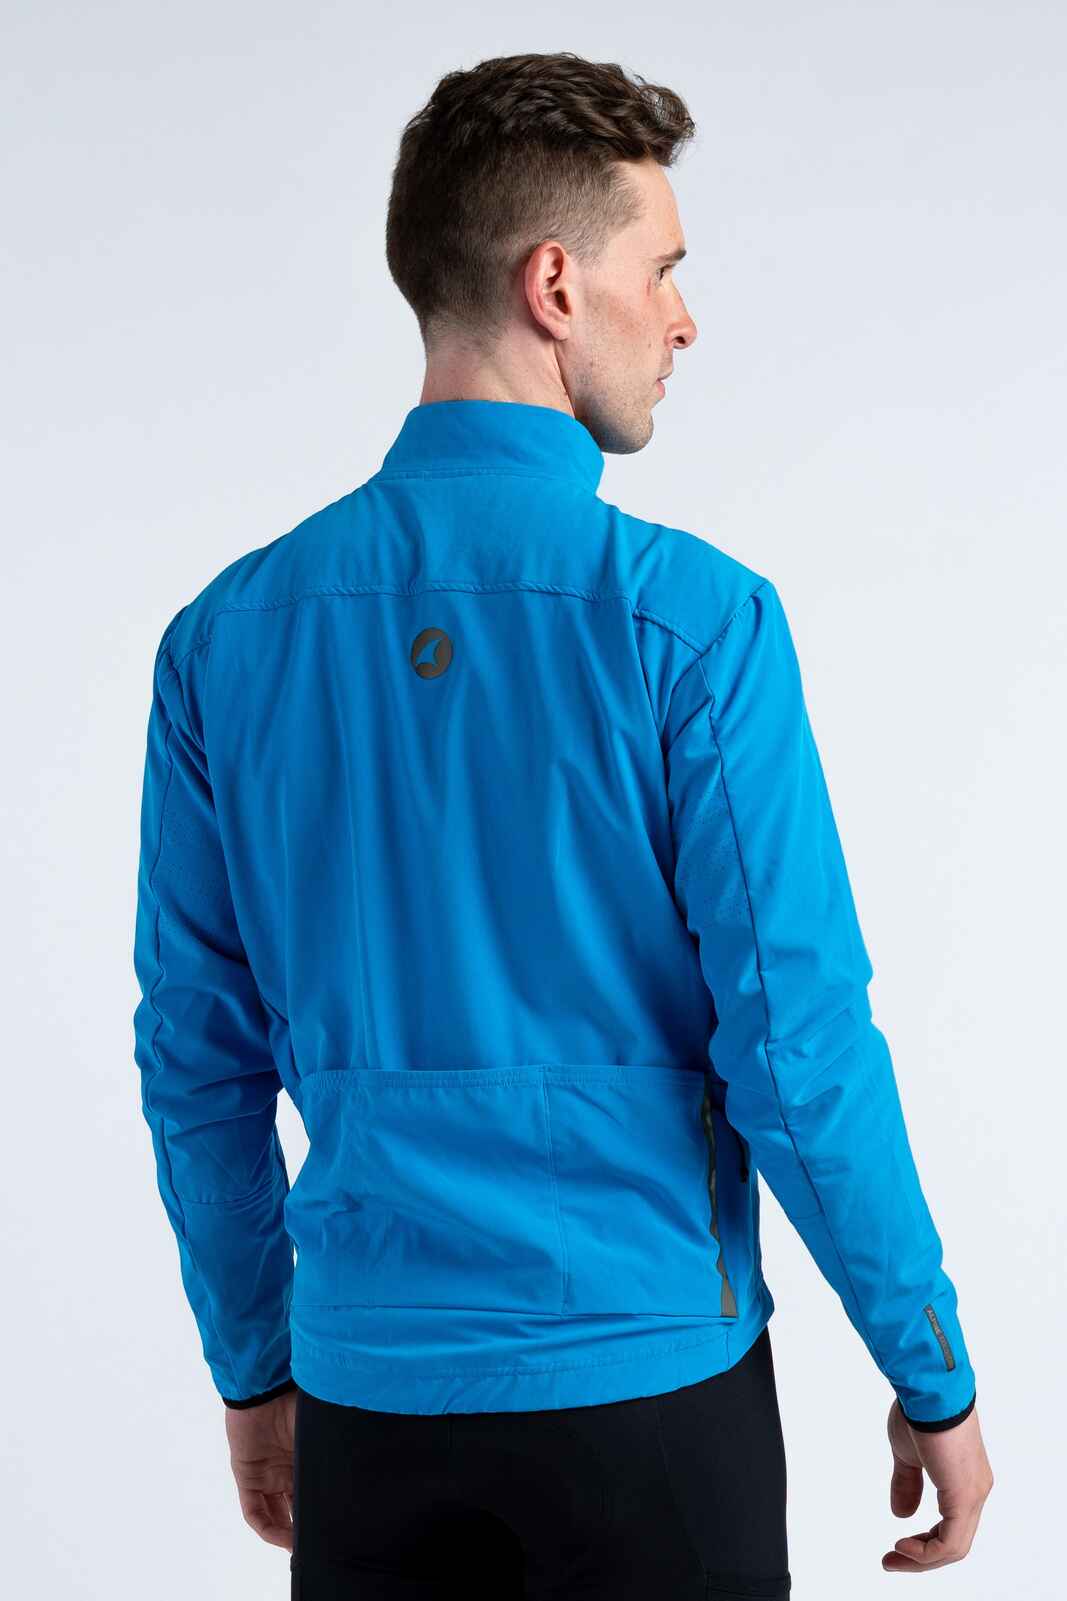 Men's Bright Blue Thermal Cycling Jacket - Back View